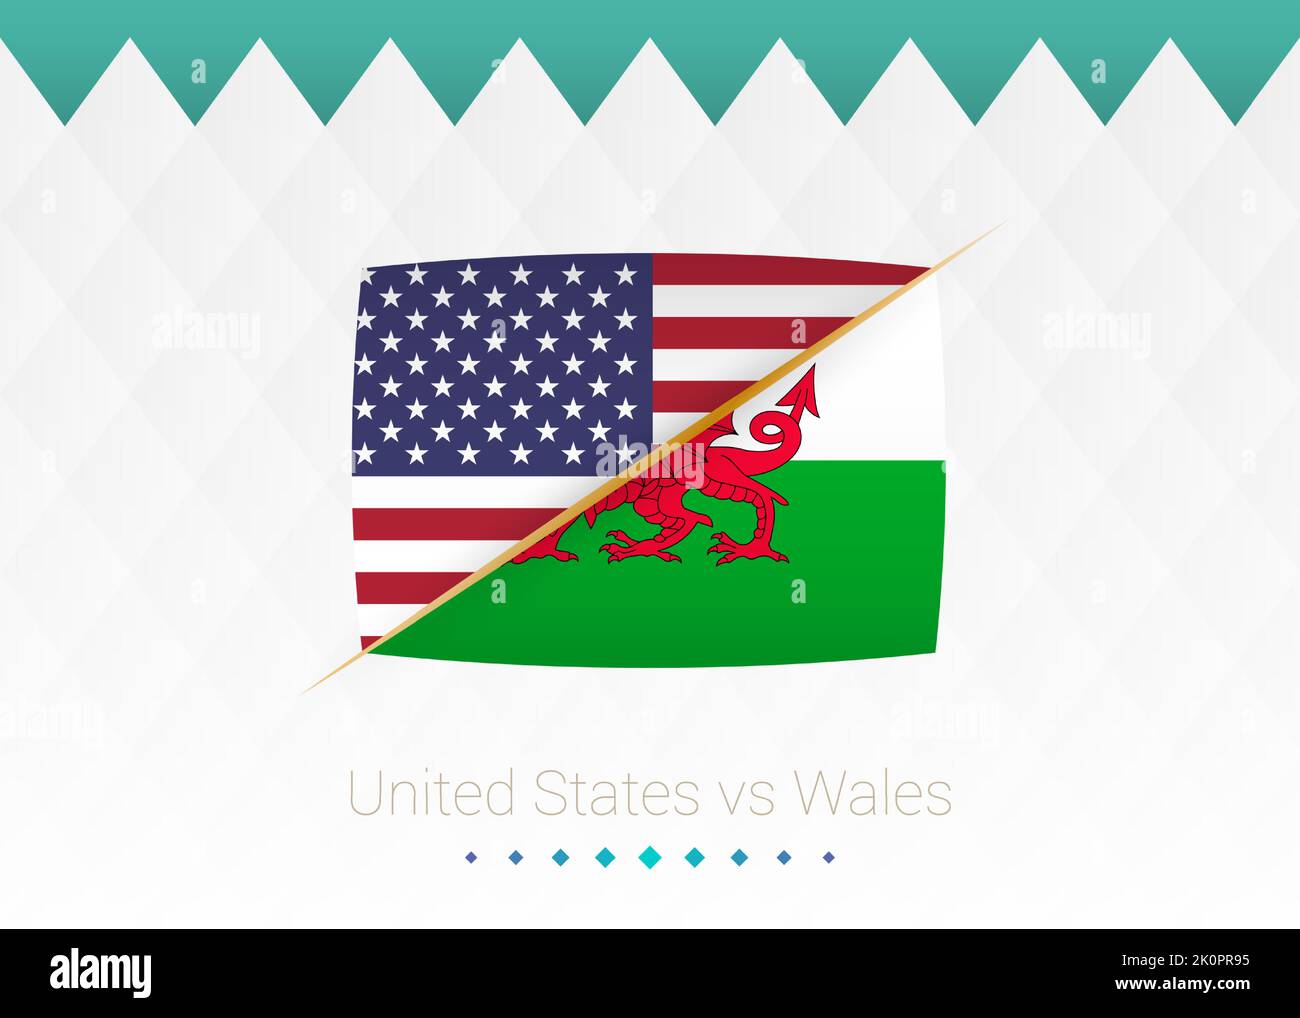 National football team United States vs Wales. Soccer 2022 match versus icon. Vector illustration. Stock Vector